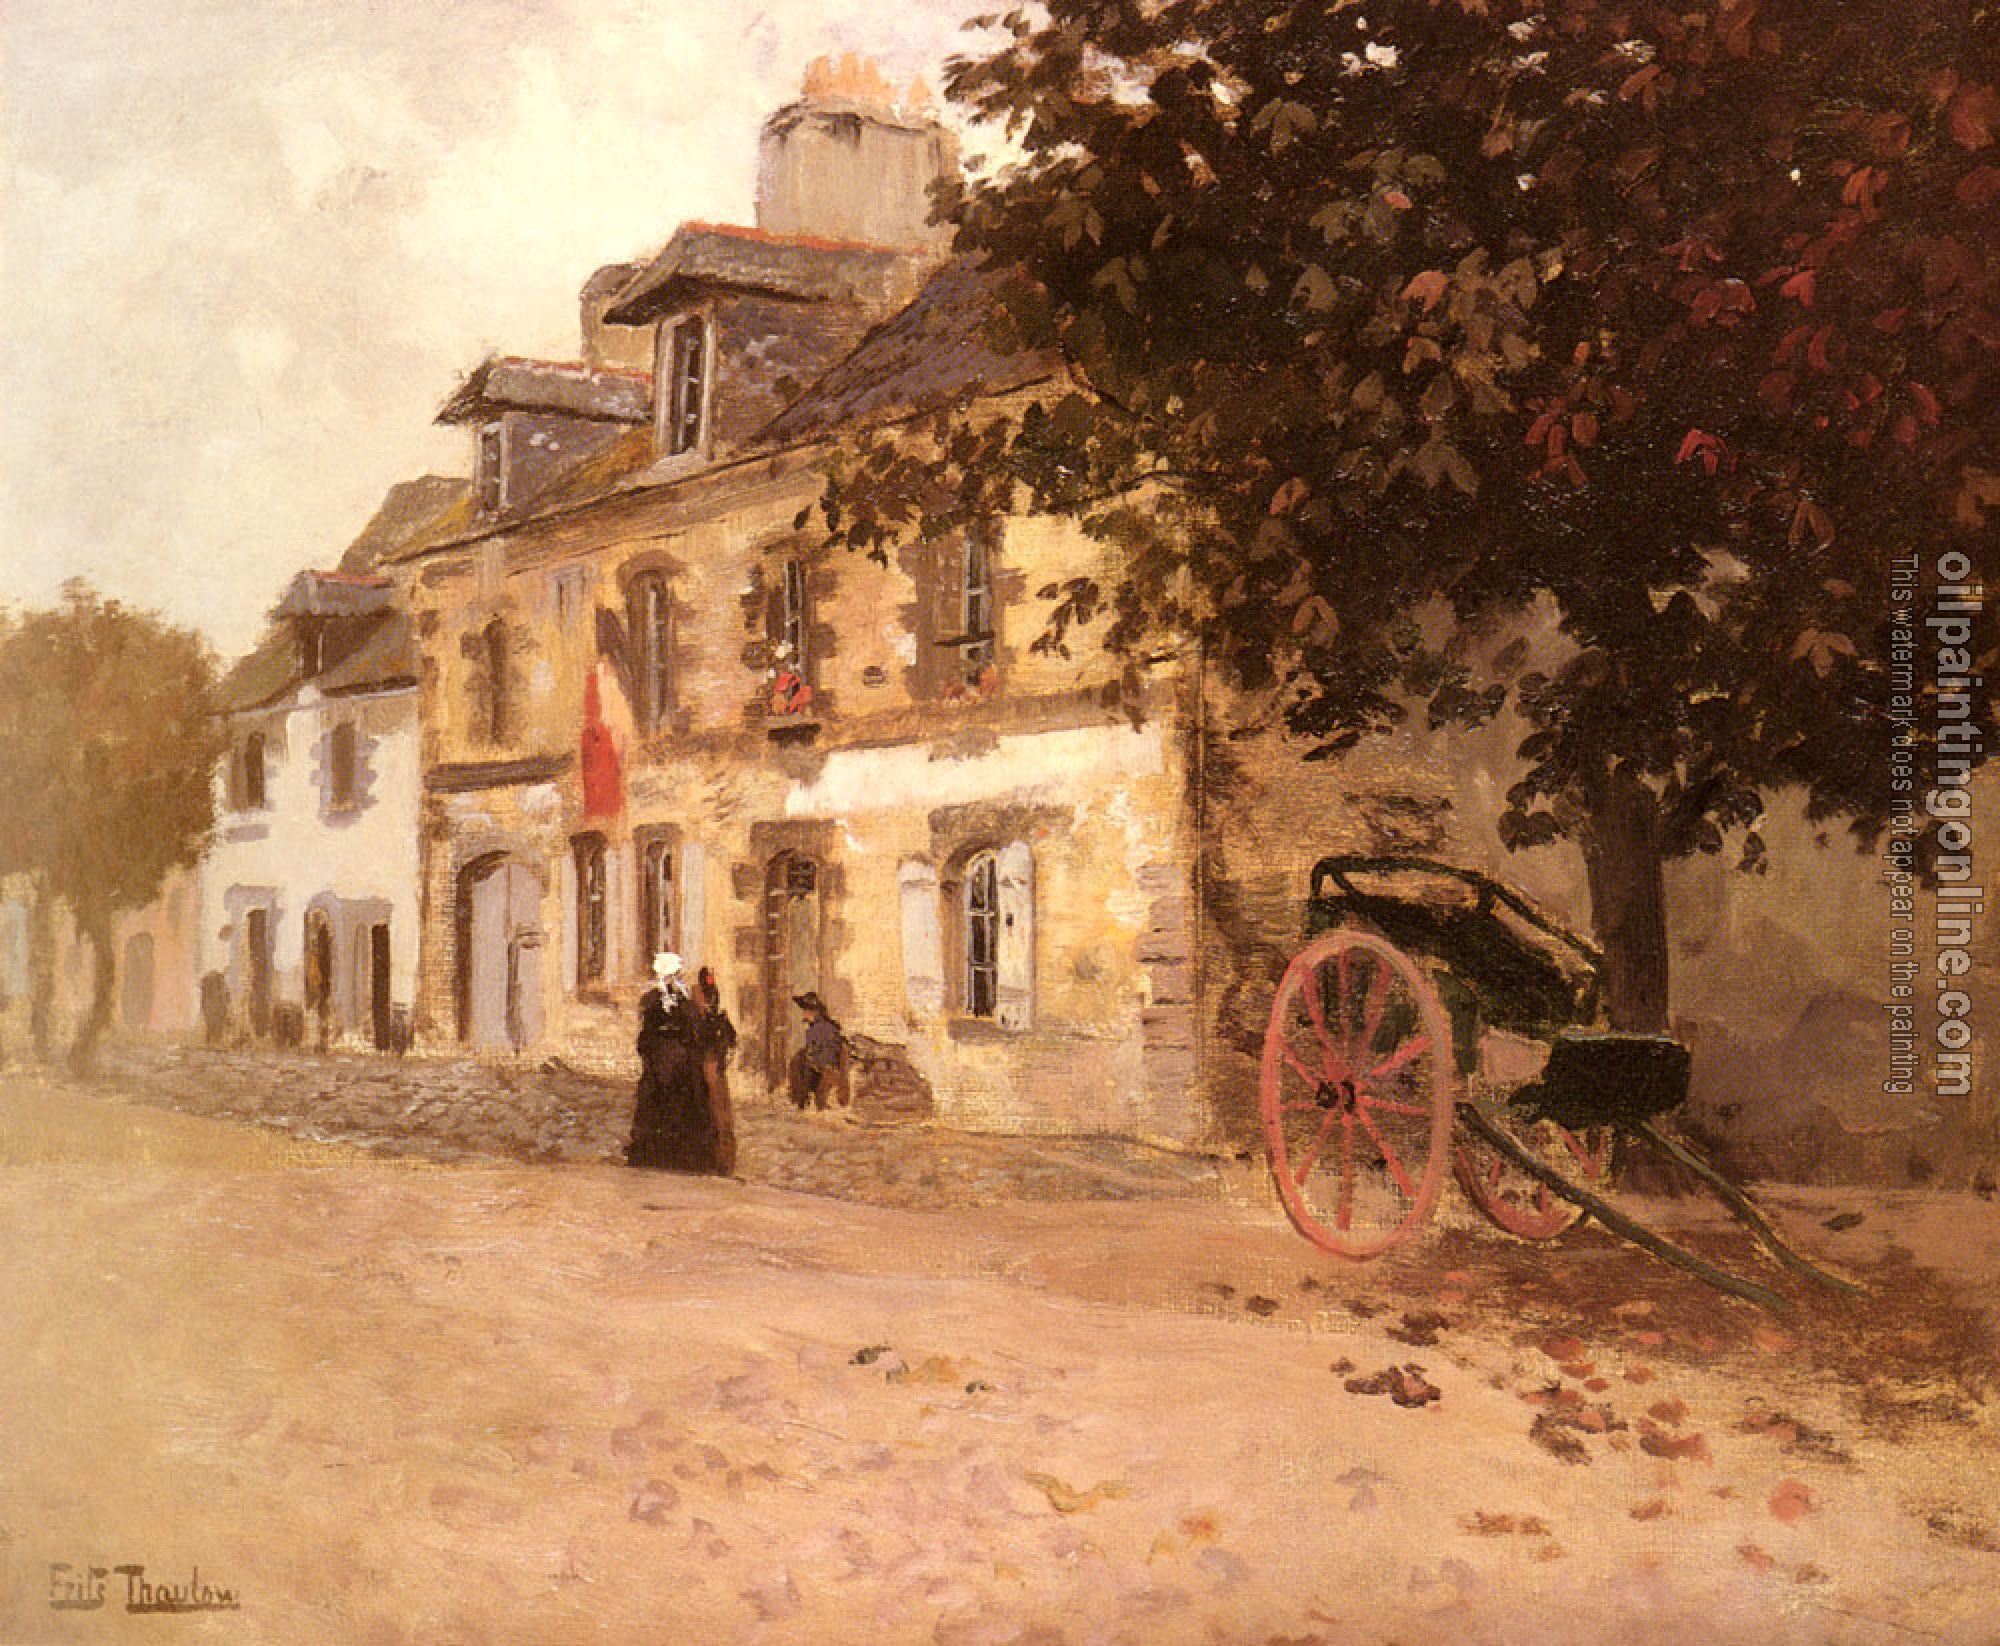 Thaulow, Frits - A Village Street In France